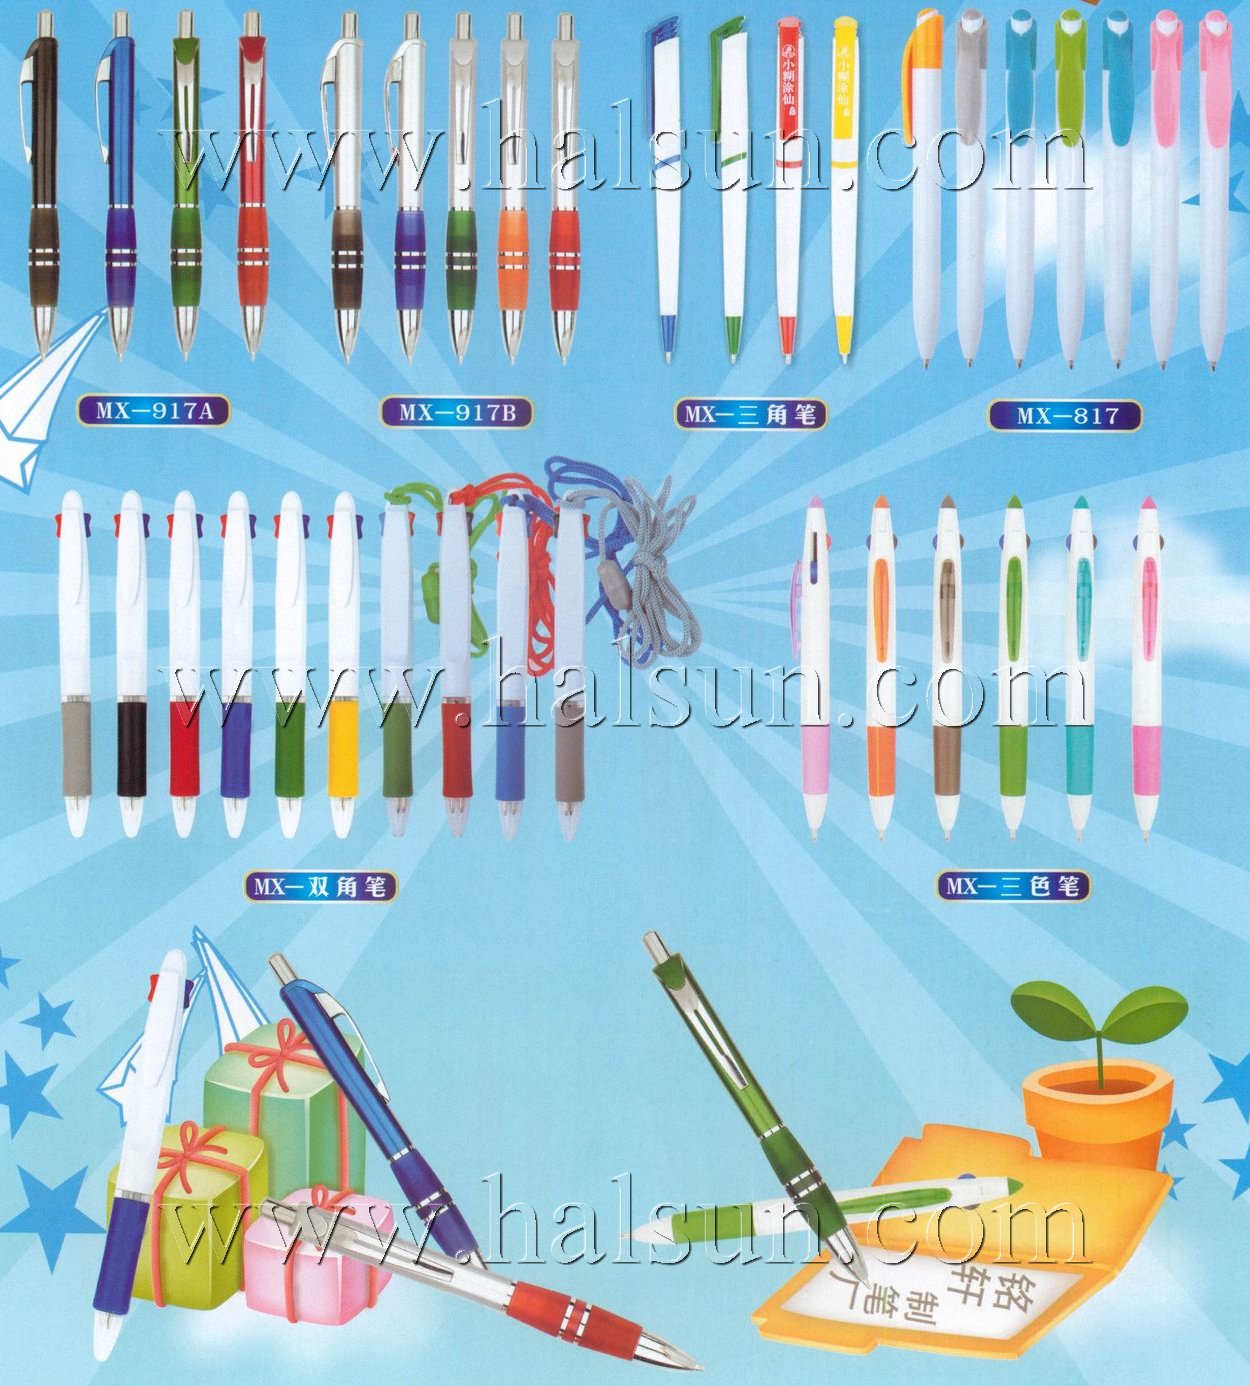 Two color pens, 3 in one pens,Lanyard pens,TP-917A,Promotional Ballpoint Pens_2014_09_21_15_24_40